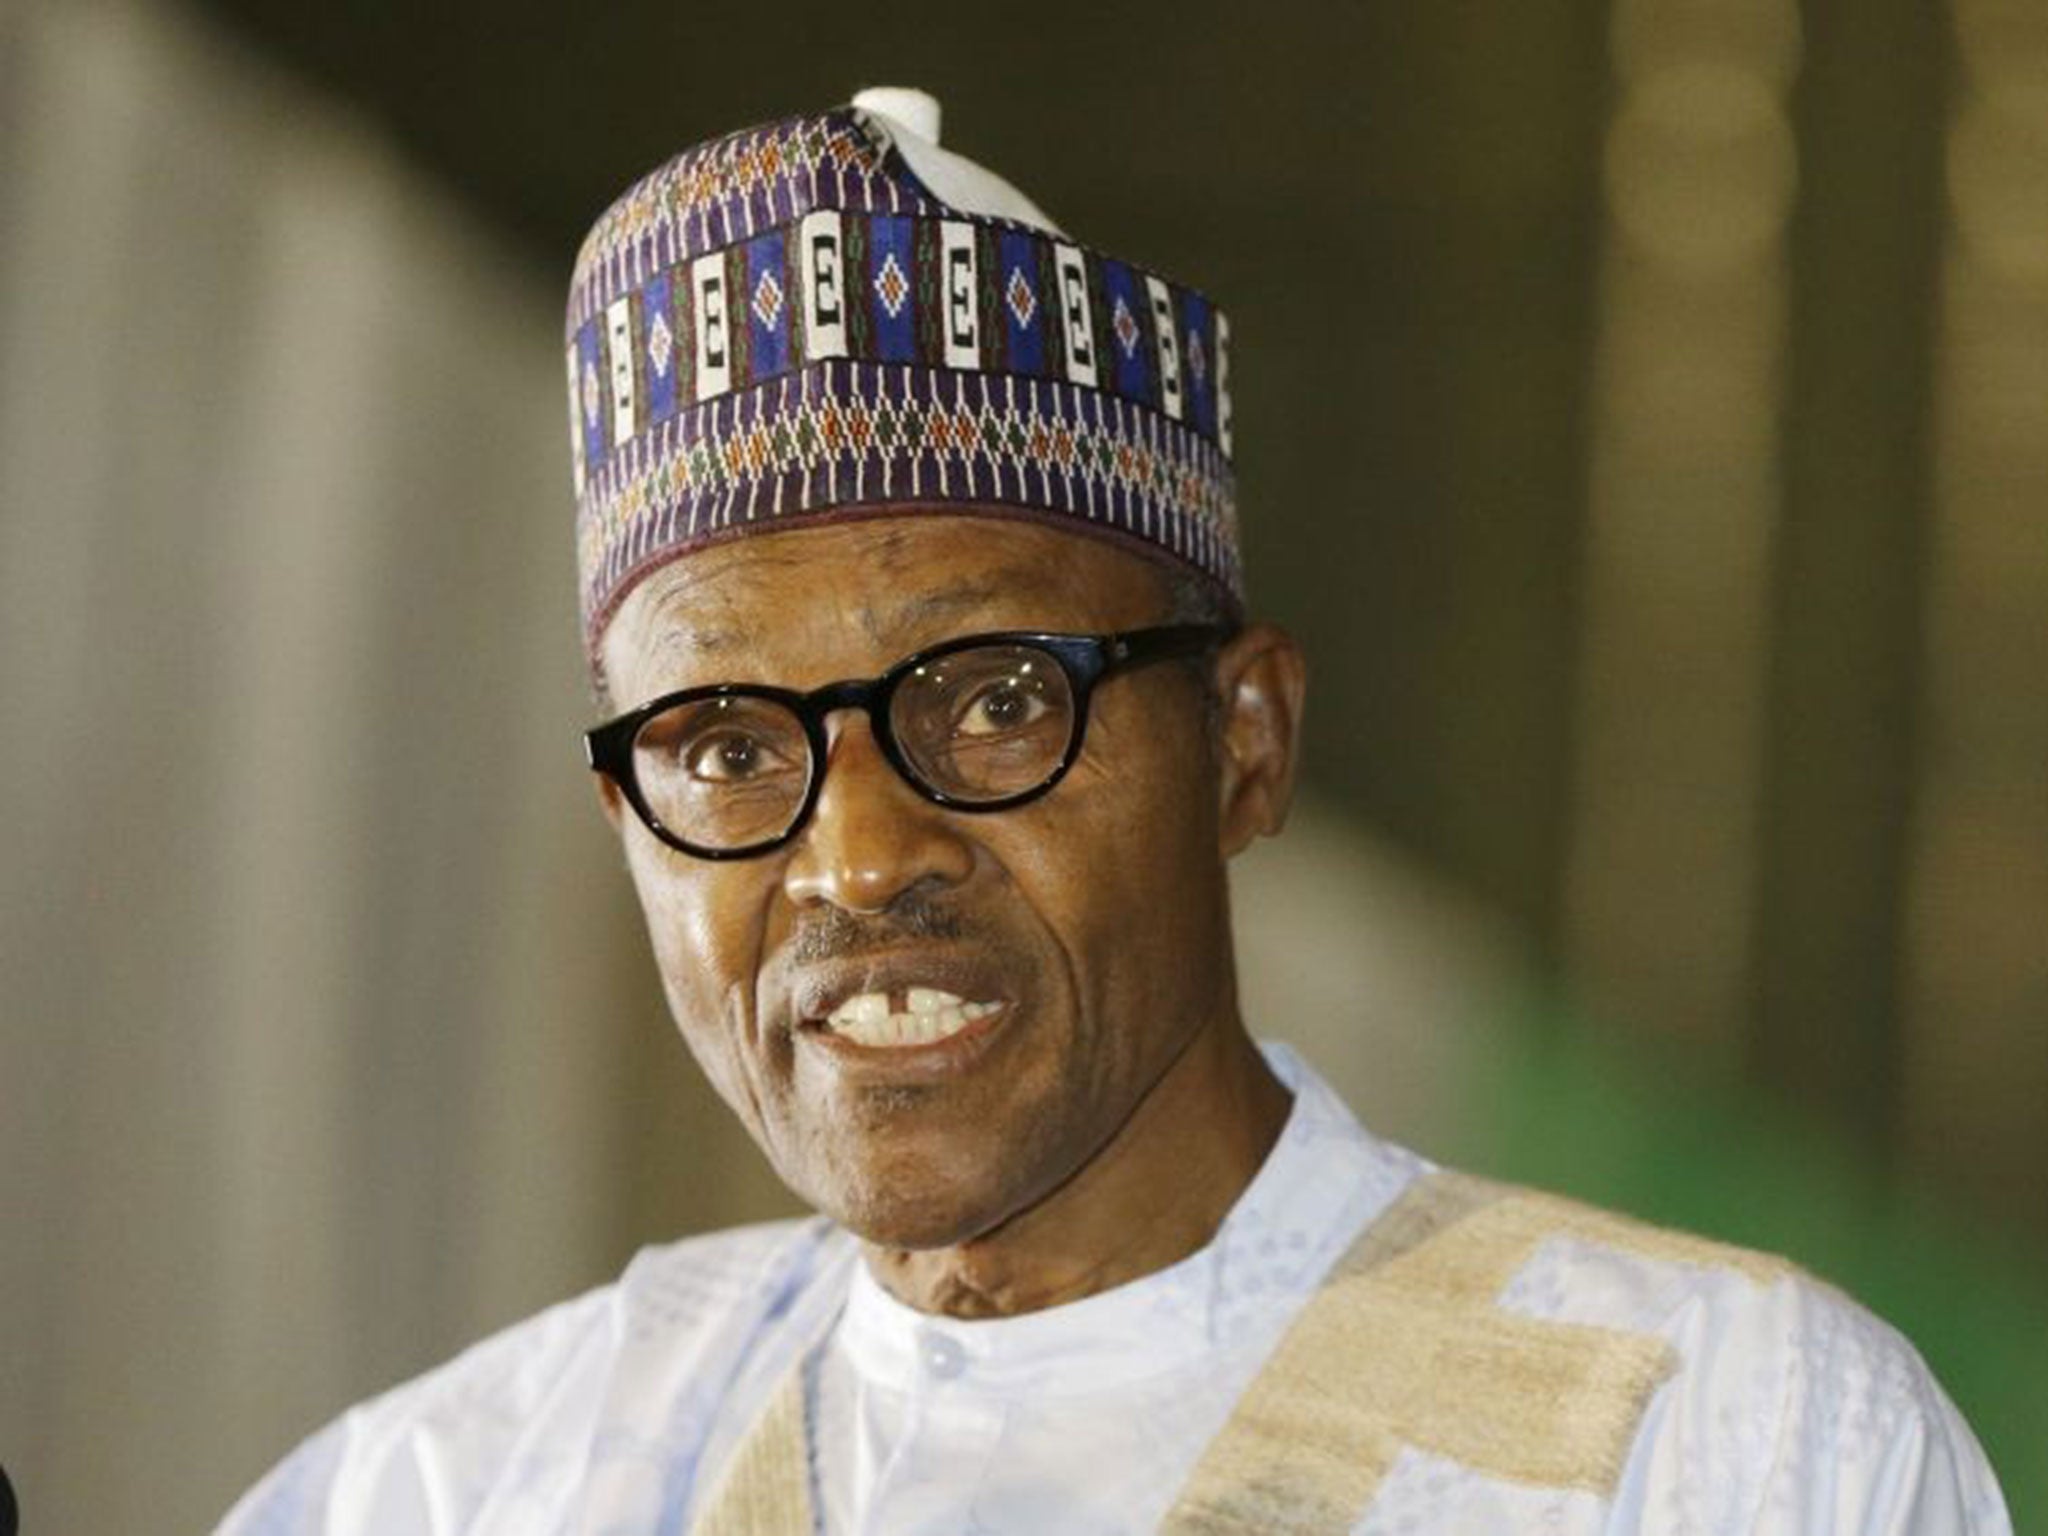 Muhammadu Buhari said he would do everything in his power to bring back the kidnapped girls